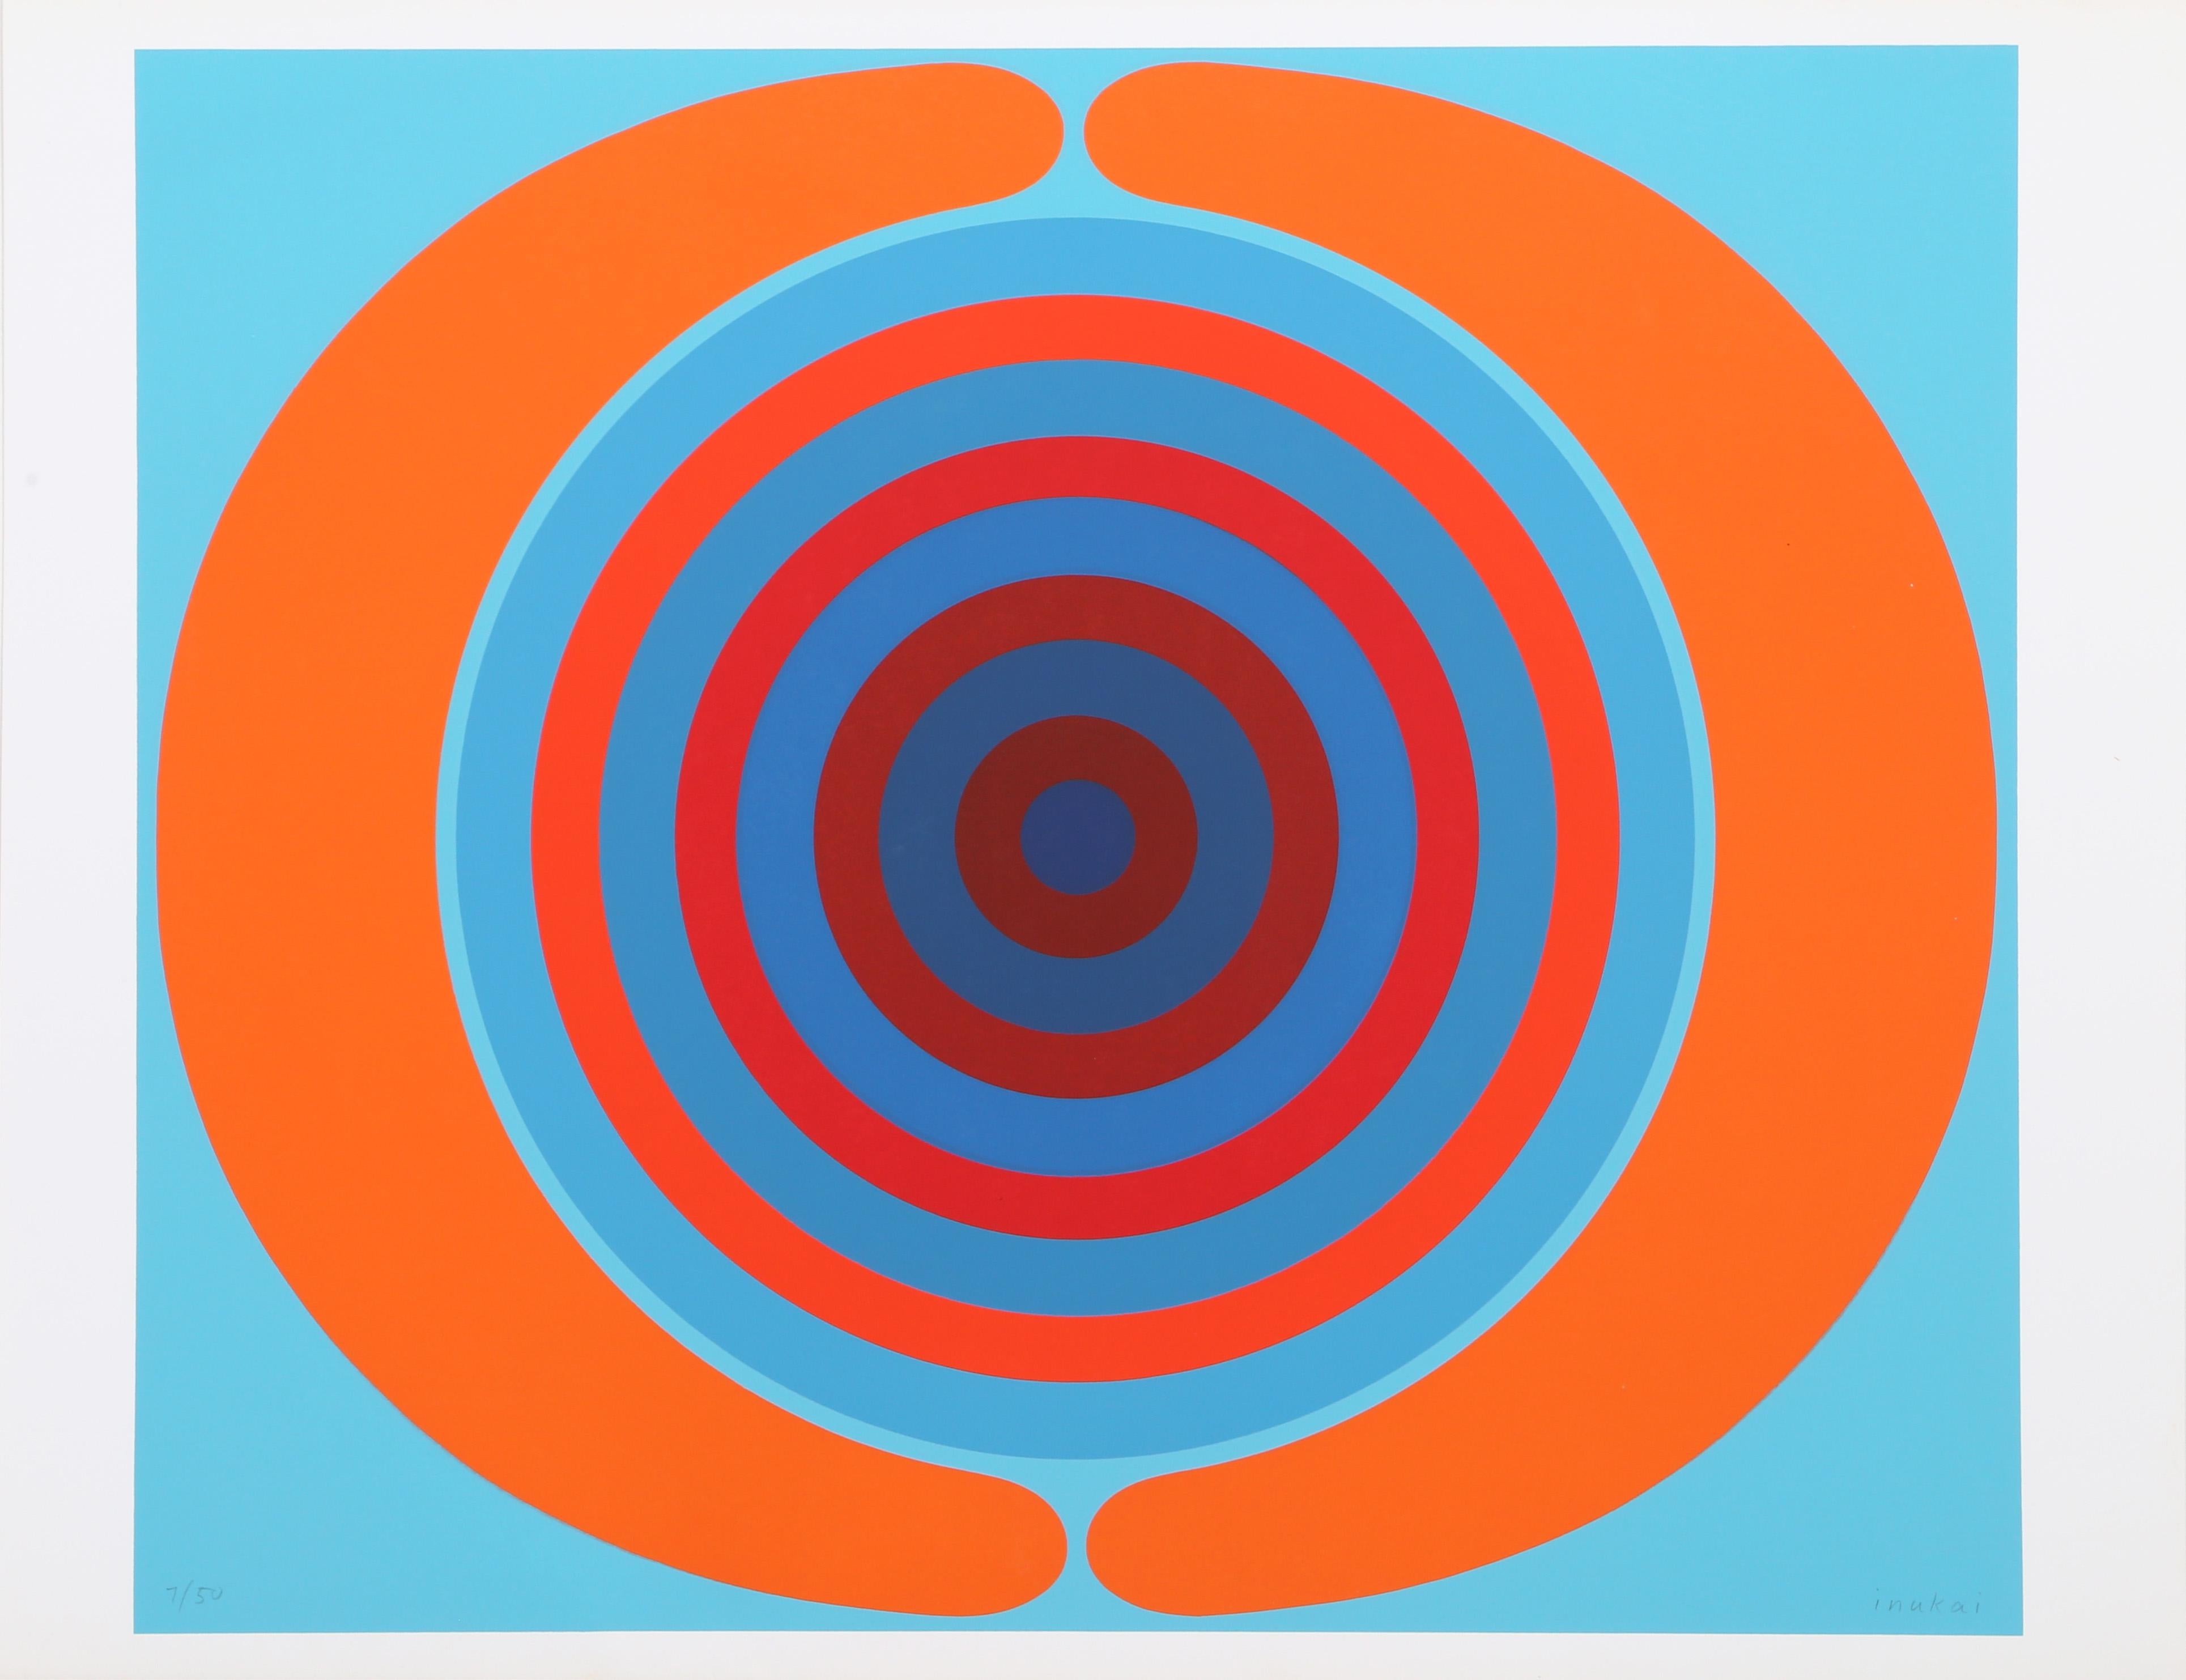 Artist: Kyohei Inukai, American (1913 - 1985)
Title: Spiral
Year: circa 1970
Medium: Silkscreen, signed and numbered in pencil
Edition: 50
Image Size: 21.5 x 25.5 inches
Size: 23 x 29.75 in. (58.42 x 75.57 cm)